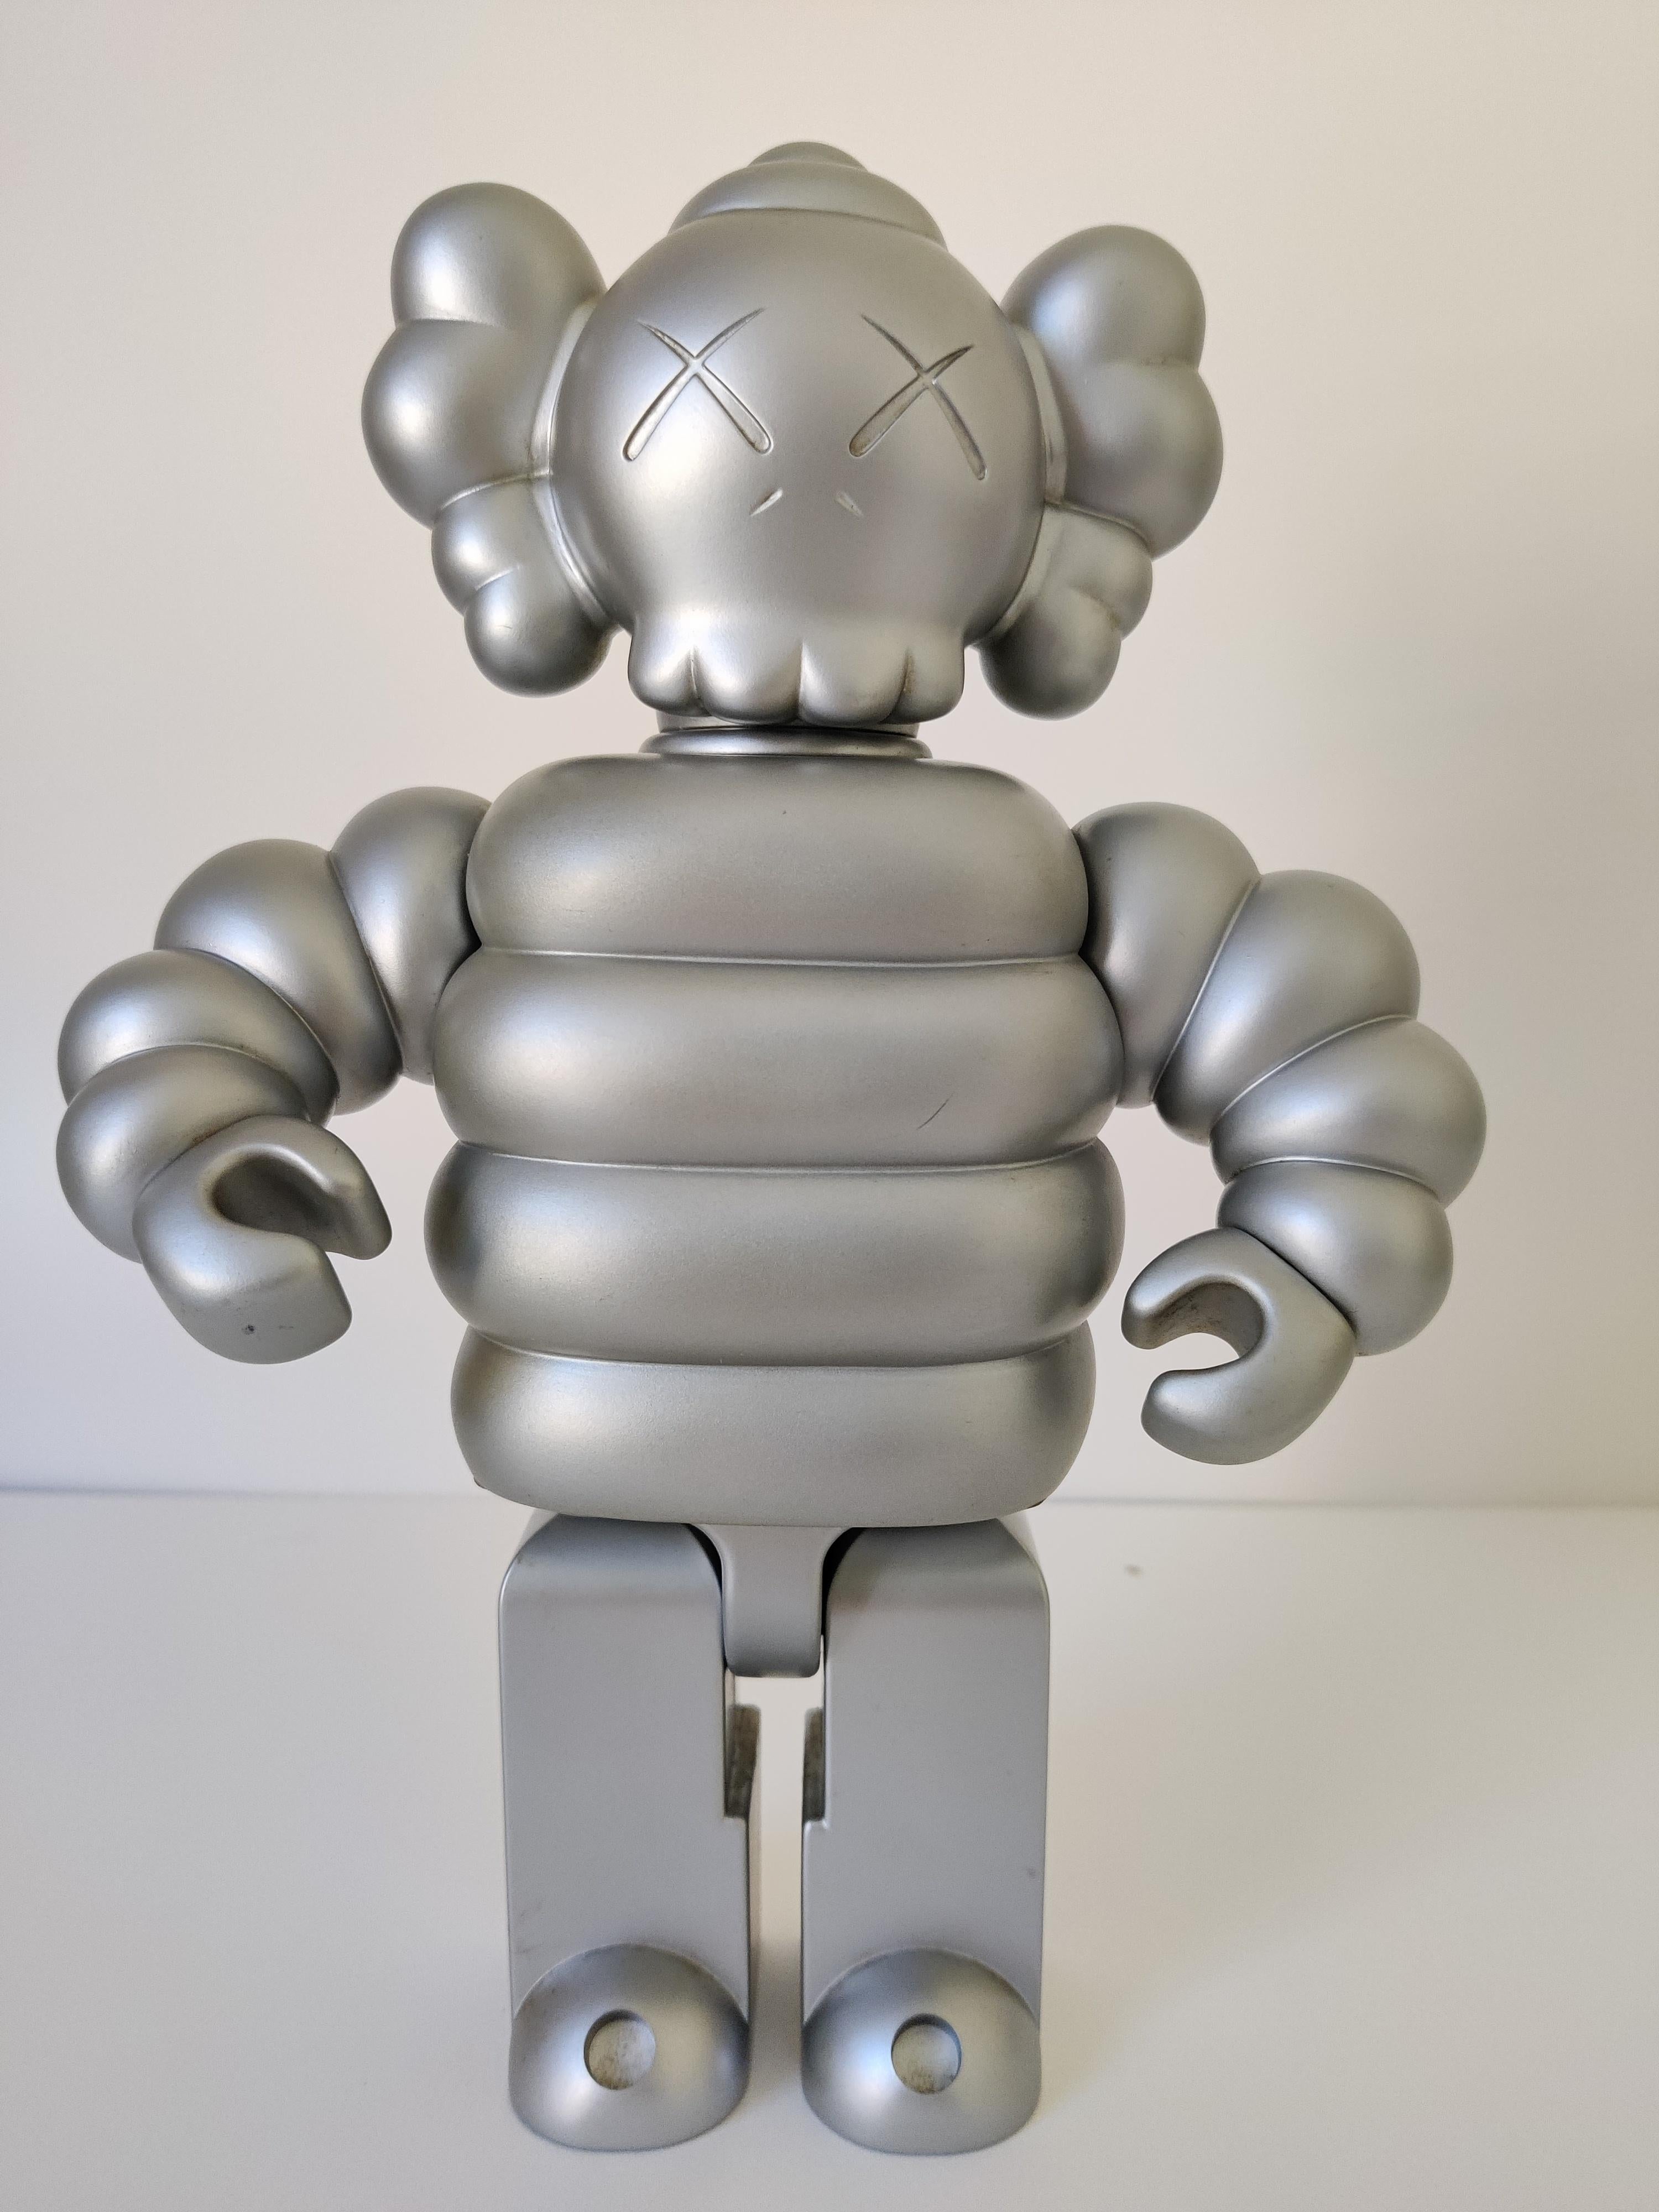 KAWS 
400% Mad Hectic Kubrick, 2003
Painted cast vinyl
10 h × 6¾ w × 3½ d in (25 × 17 × 9 cm)
Stamped signature and date to reverse '© KAWS..03'. 
Impressed title and manufacturer's mark to underside 'Kubrick Medicom Toy'. This work is from an